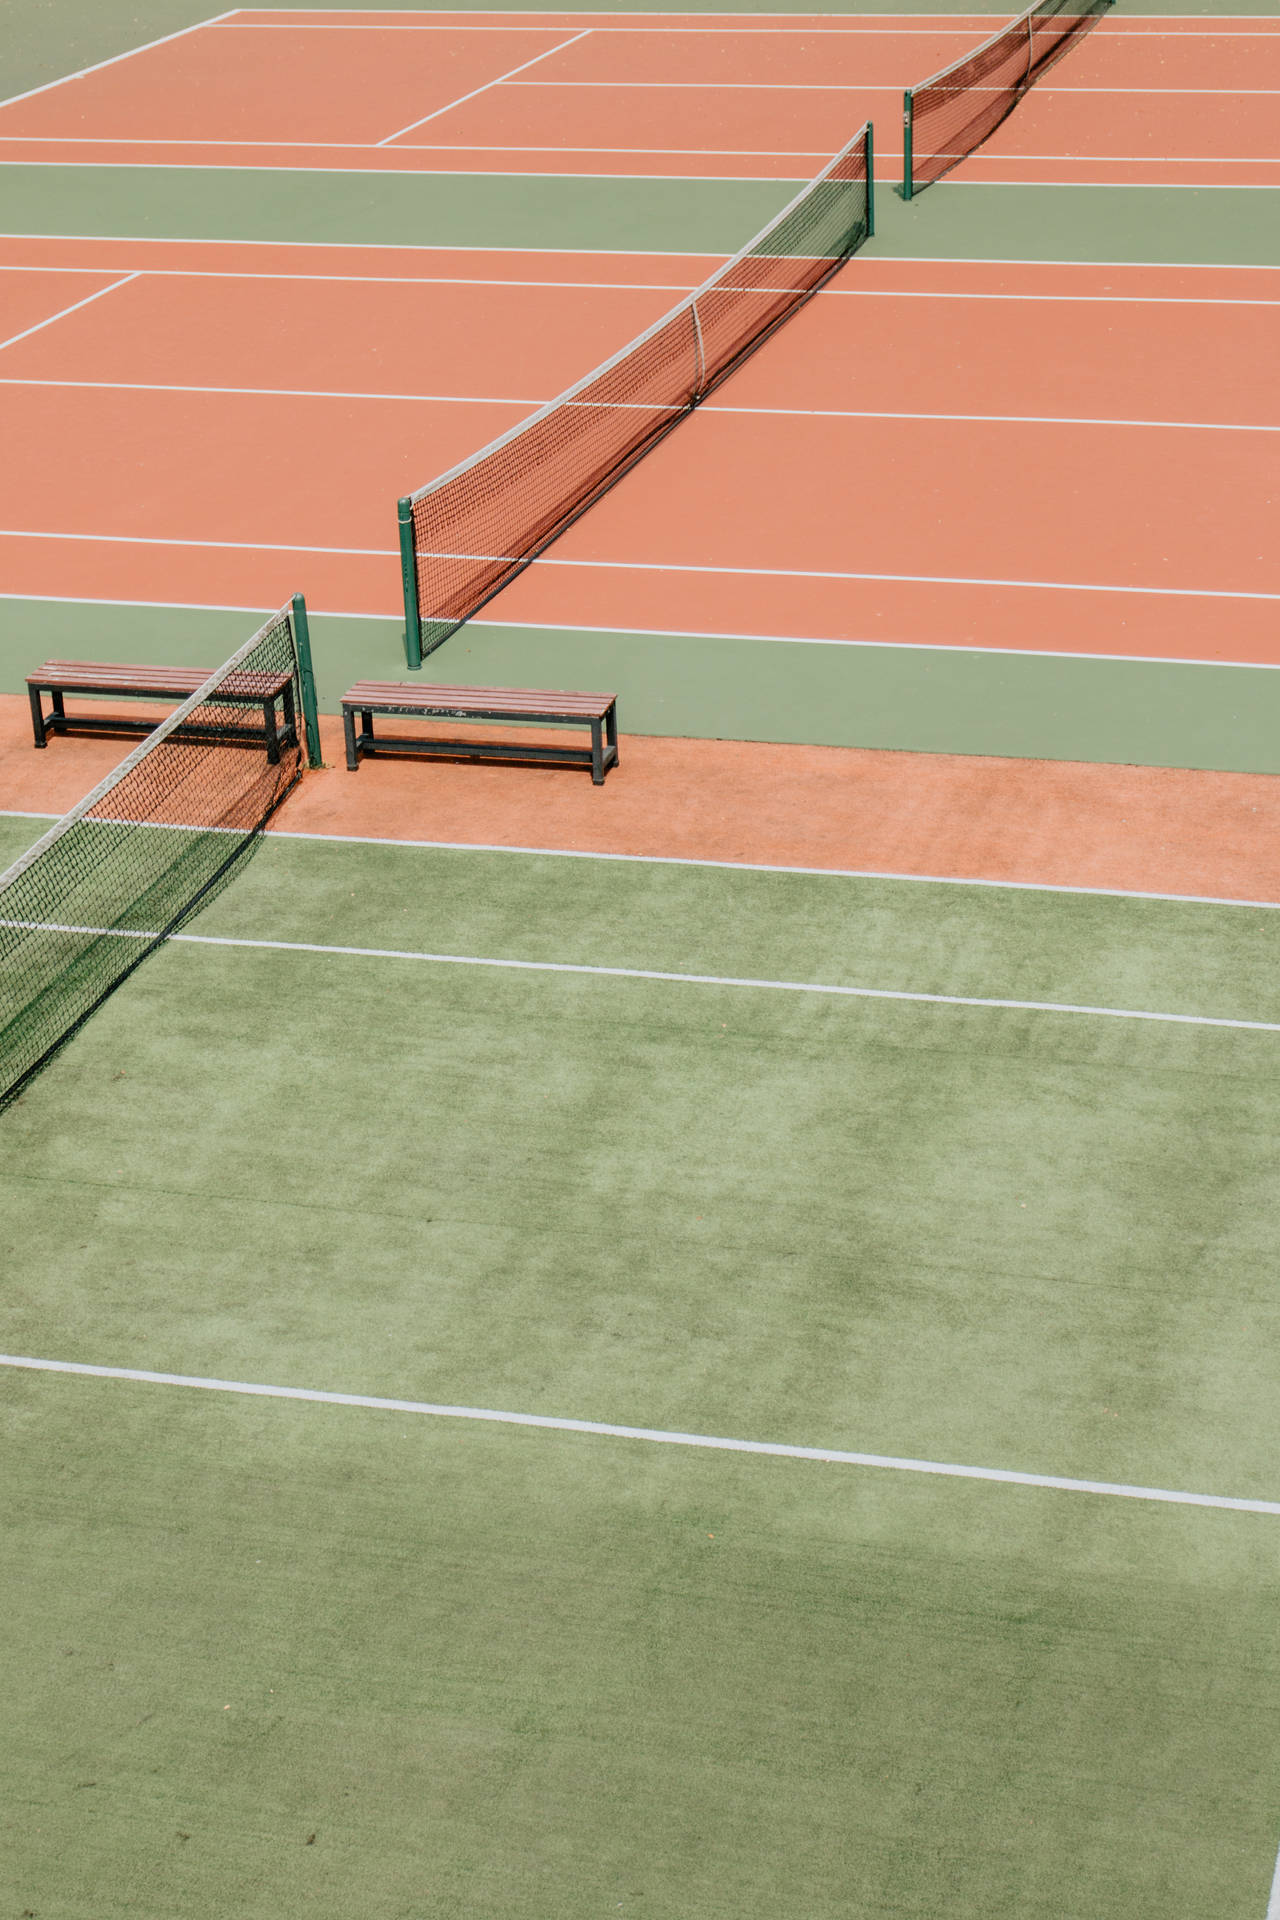 Tennis 3537X5305 Wallpaper and Background Image